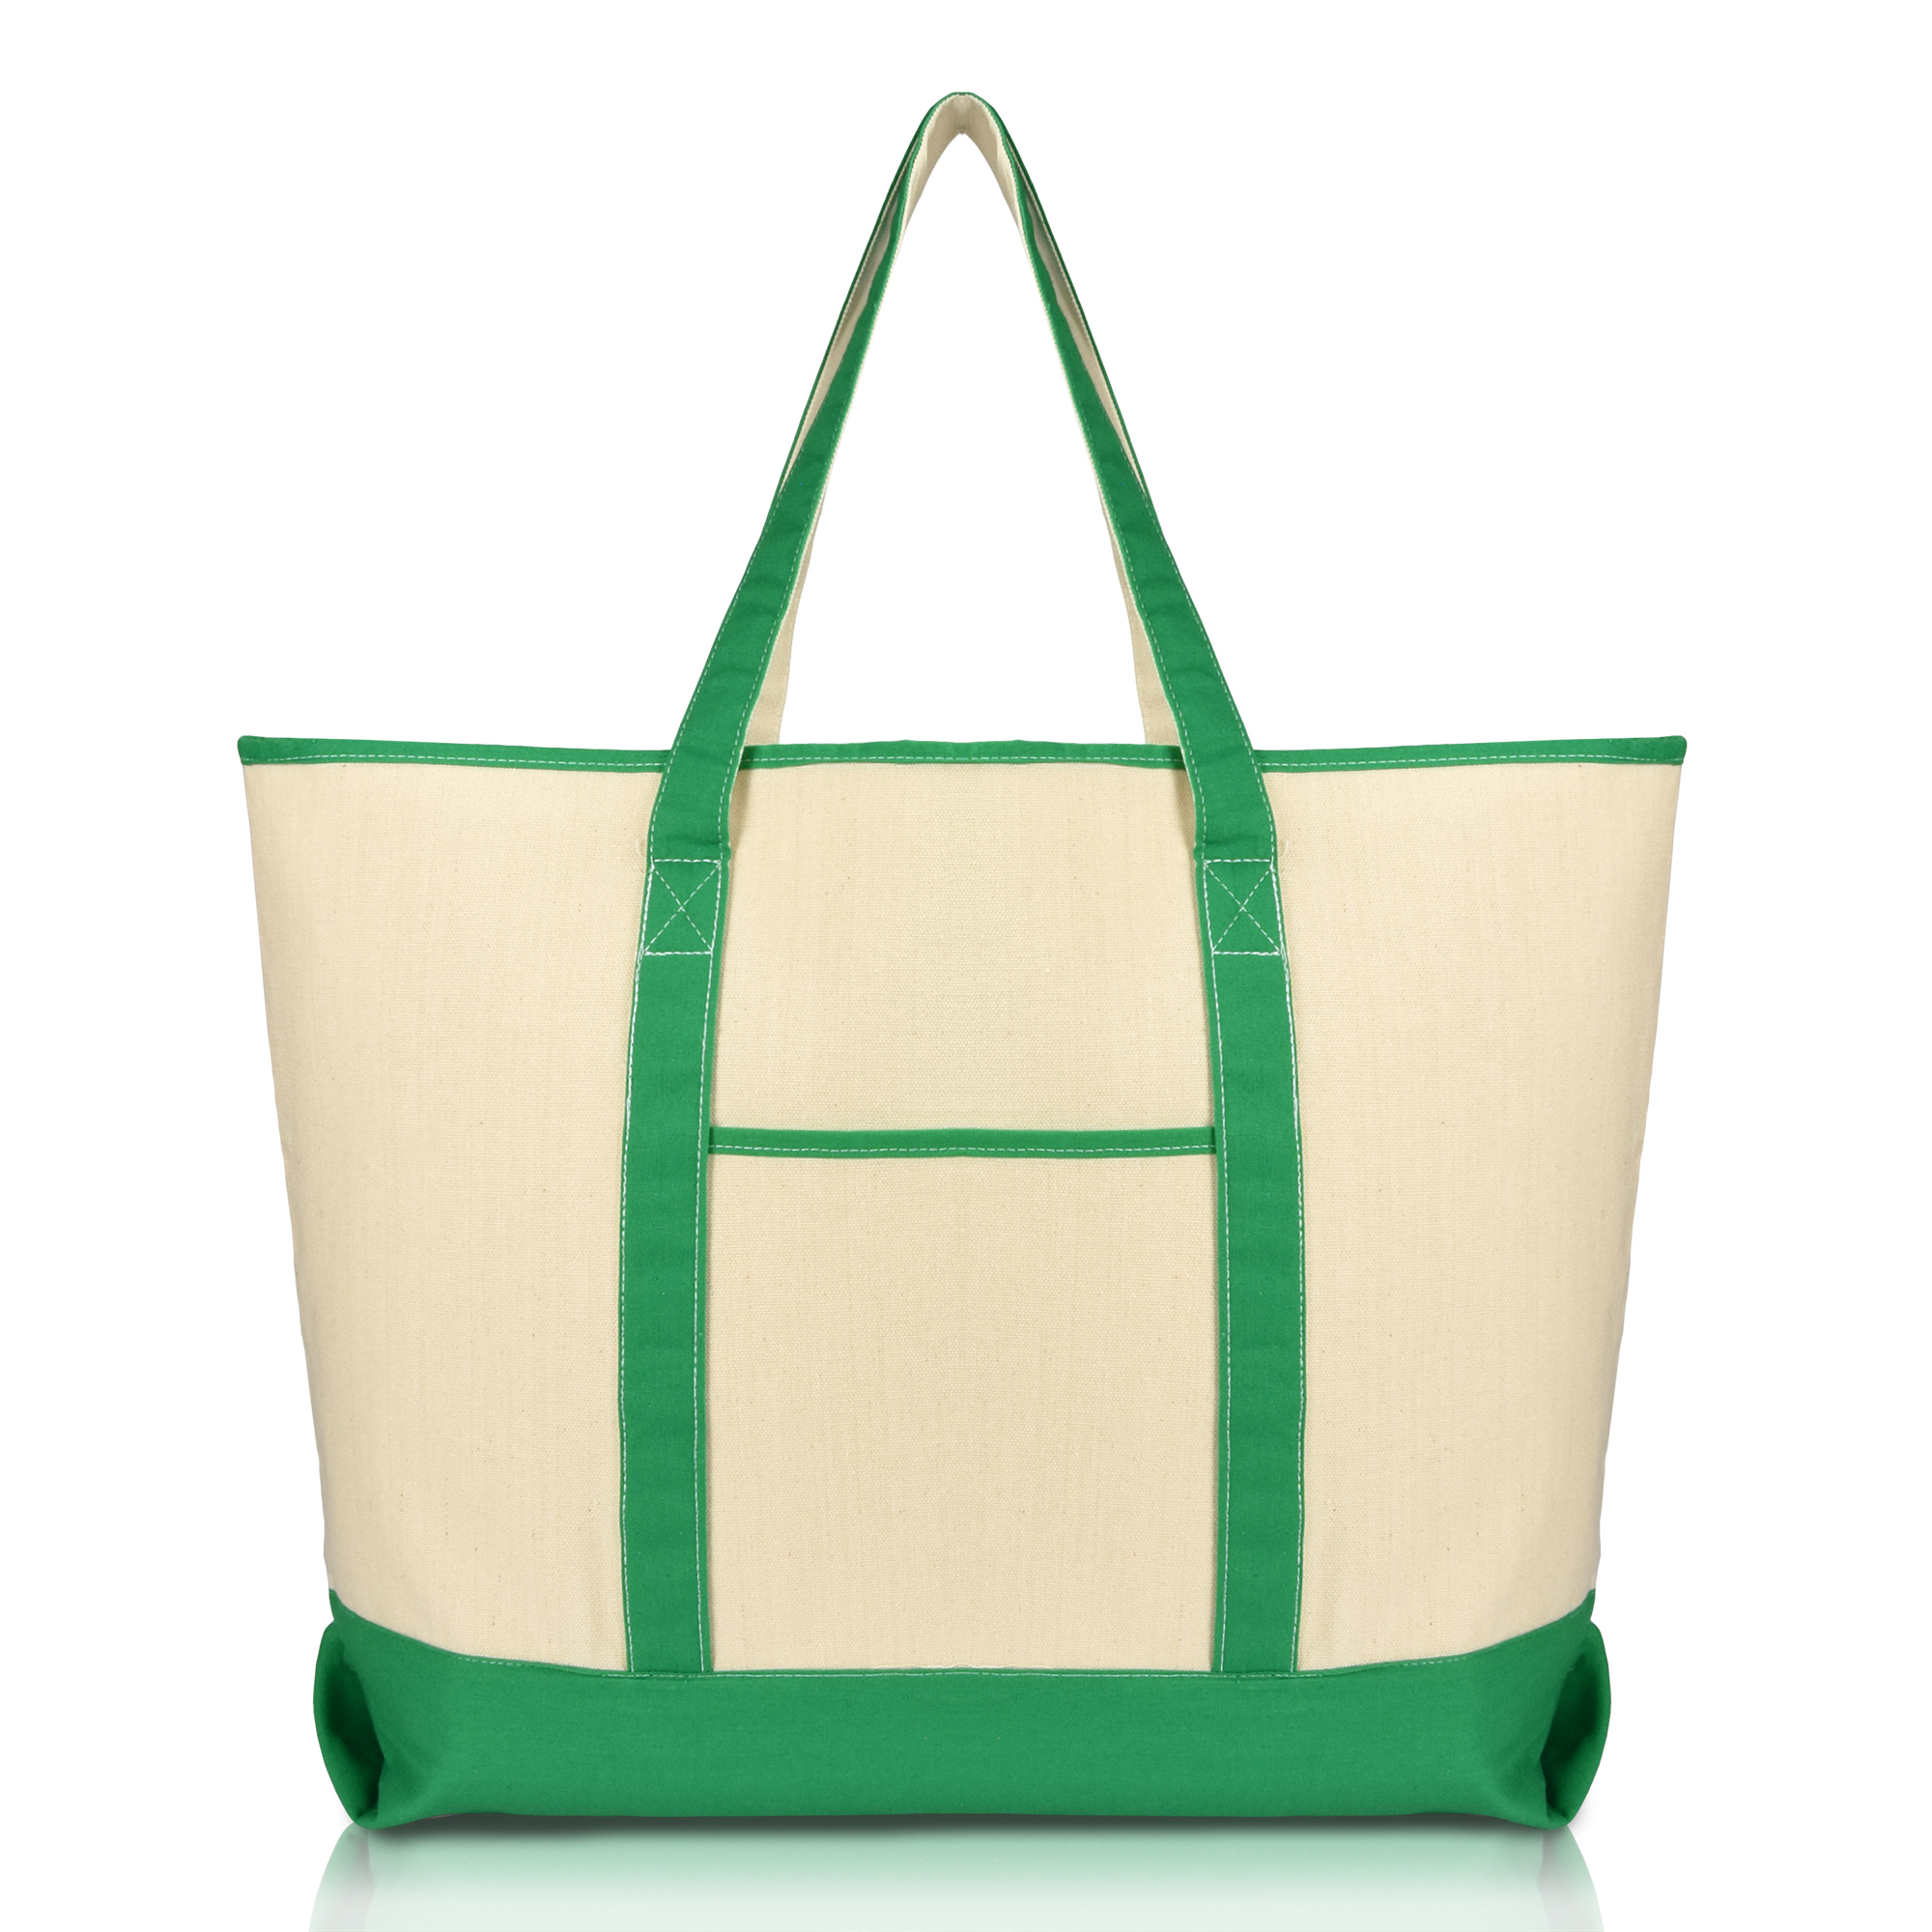 DALIX 22" Open Top Deluxe Tote Bag with Outer Pocket in Dark Green - image 1 of 5